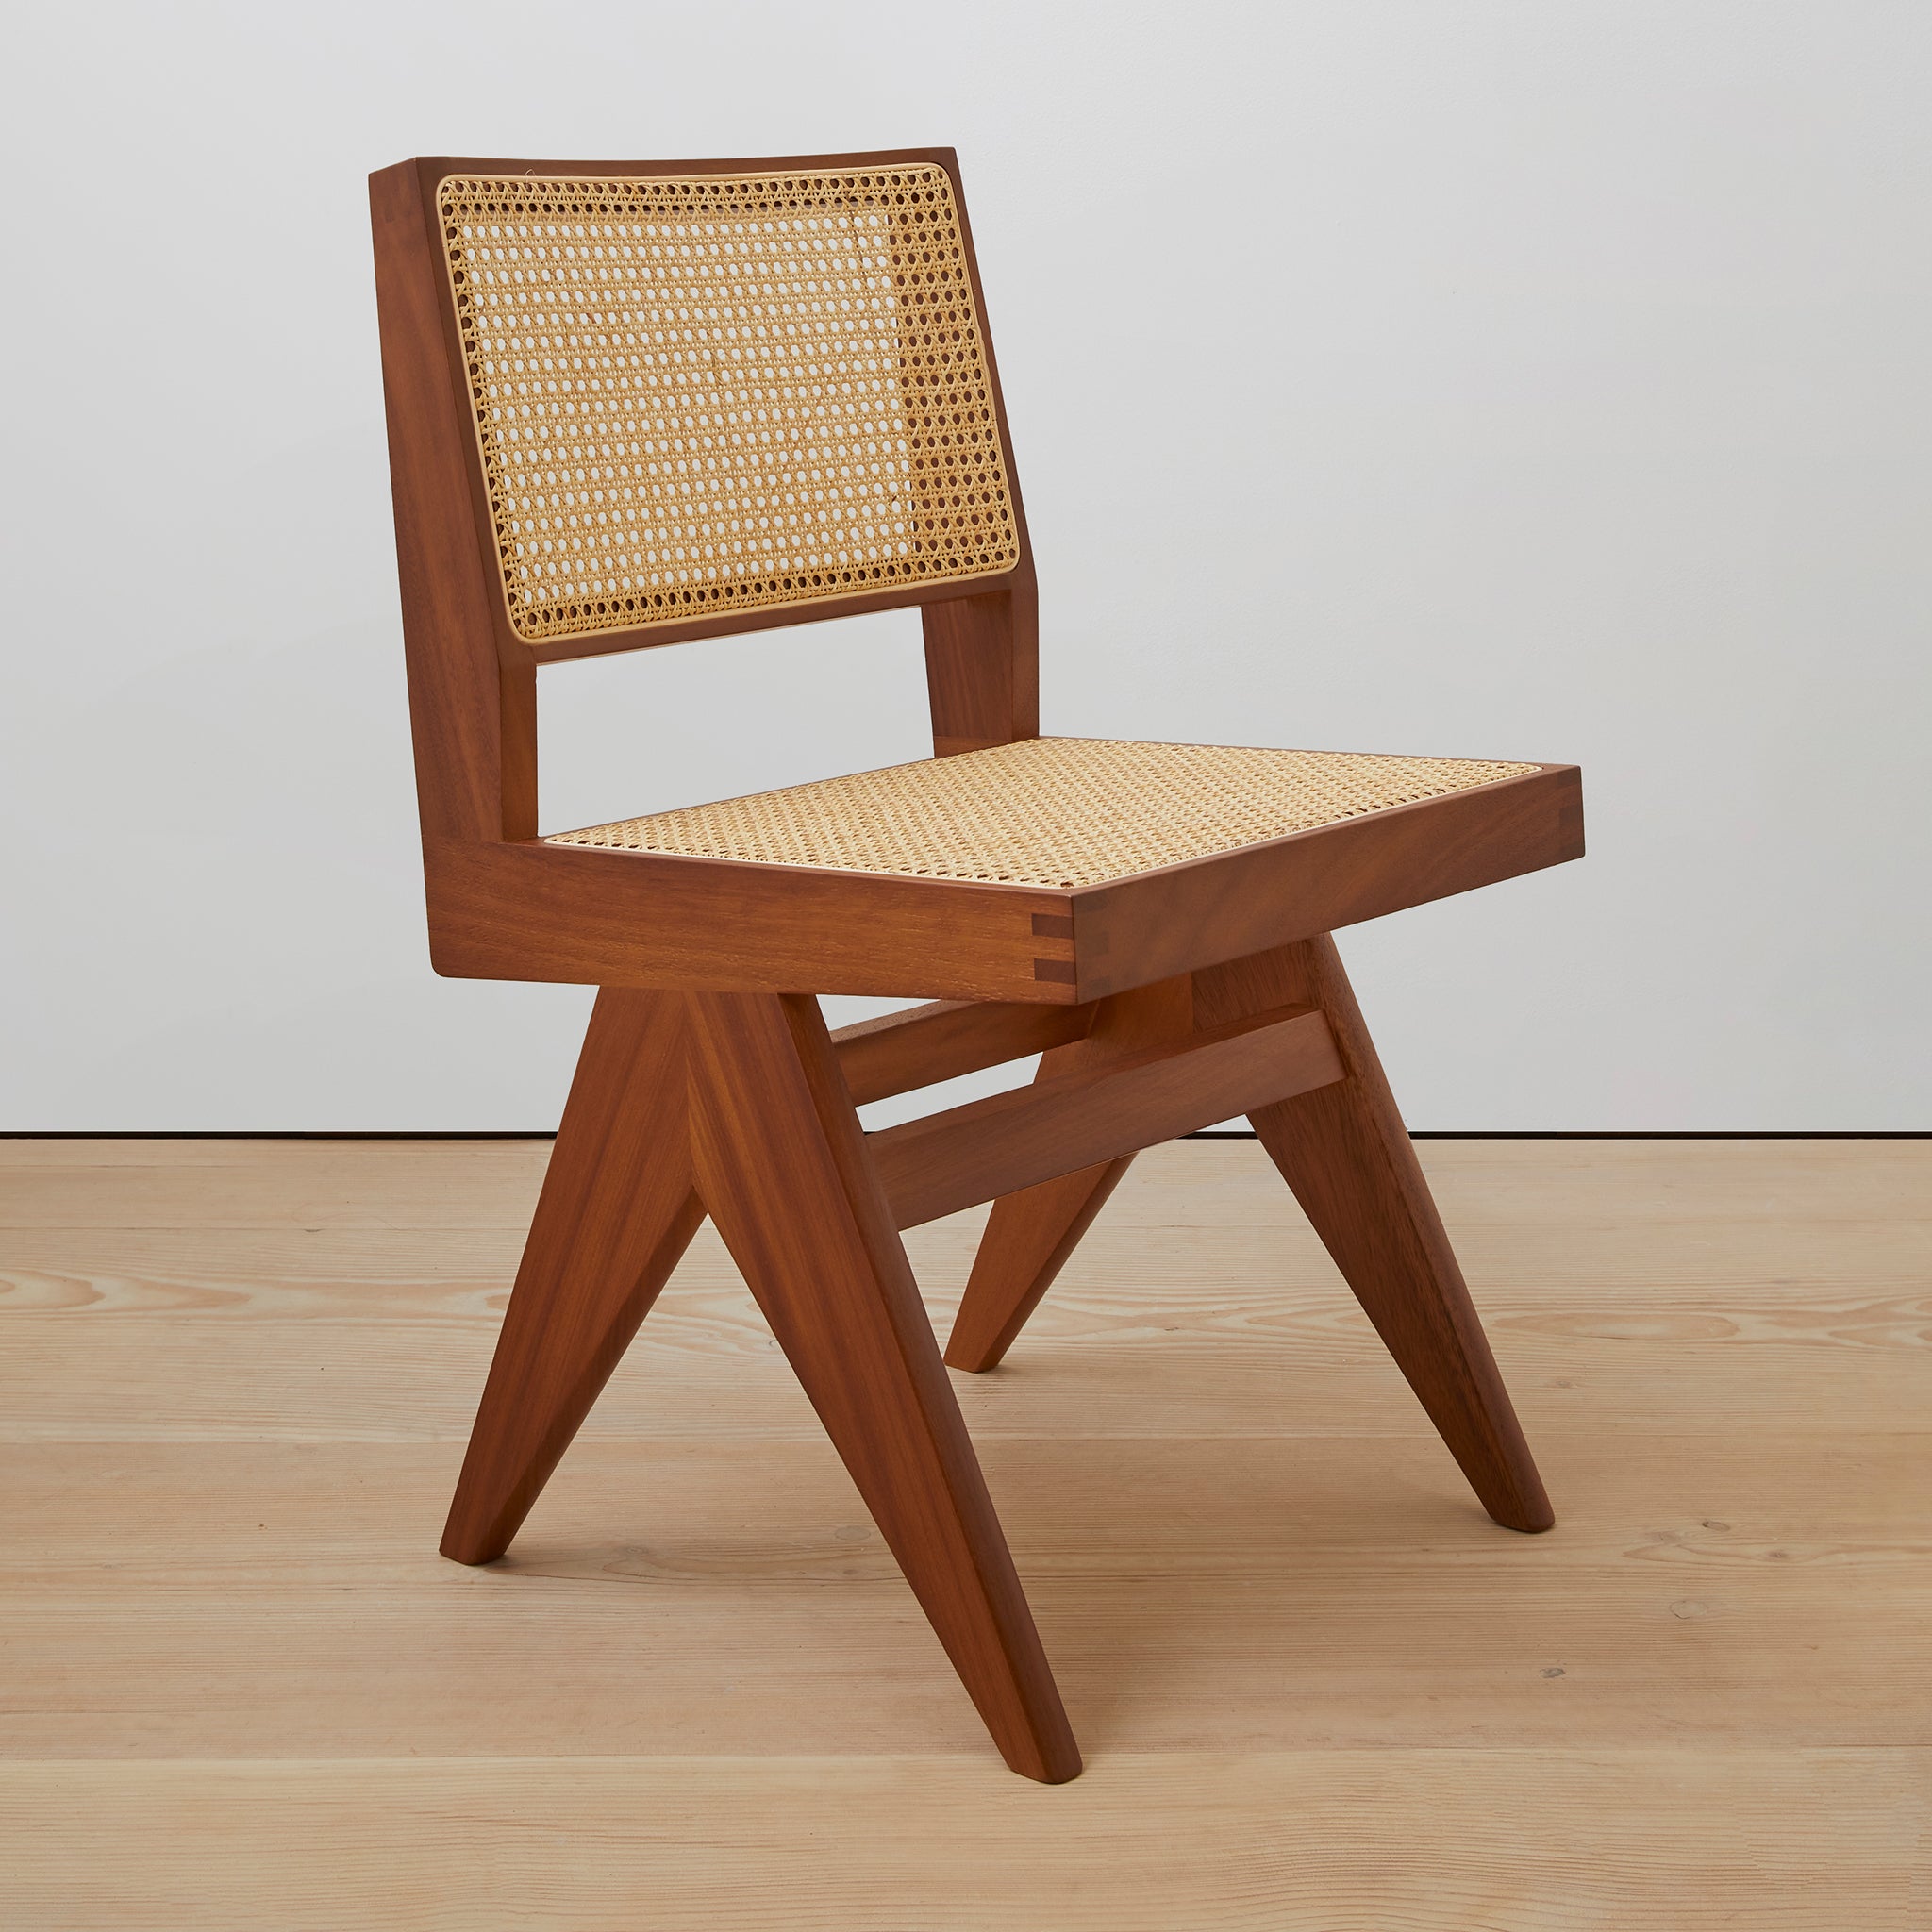 Main view of an authentic chandigarh side chair, pierre jeanneret era, teak frame, viennese cane, produced by Klarel. #K38-1